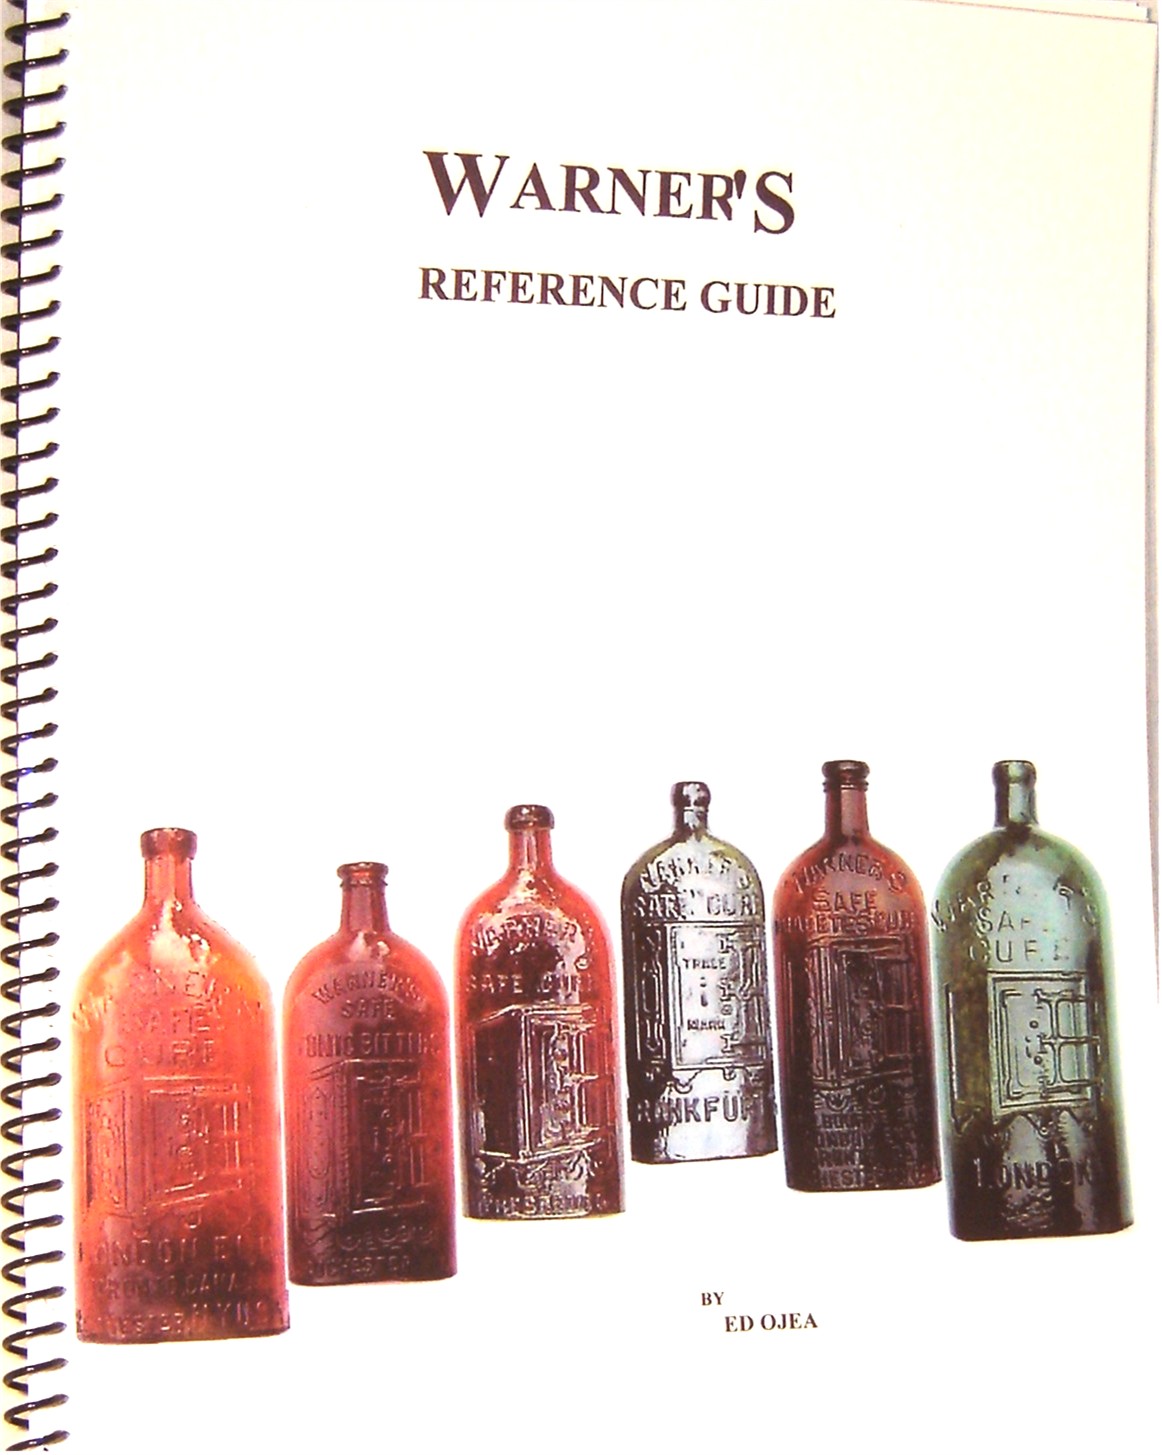 Warner's reference guide